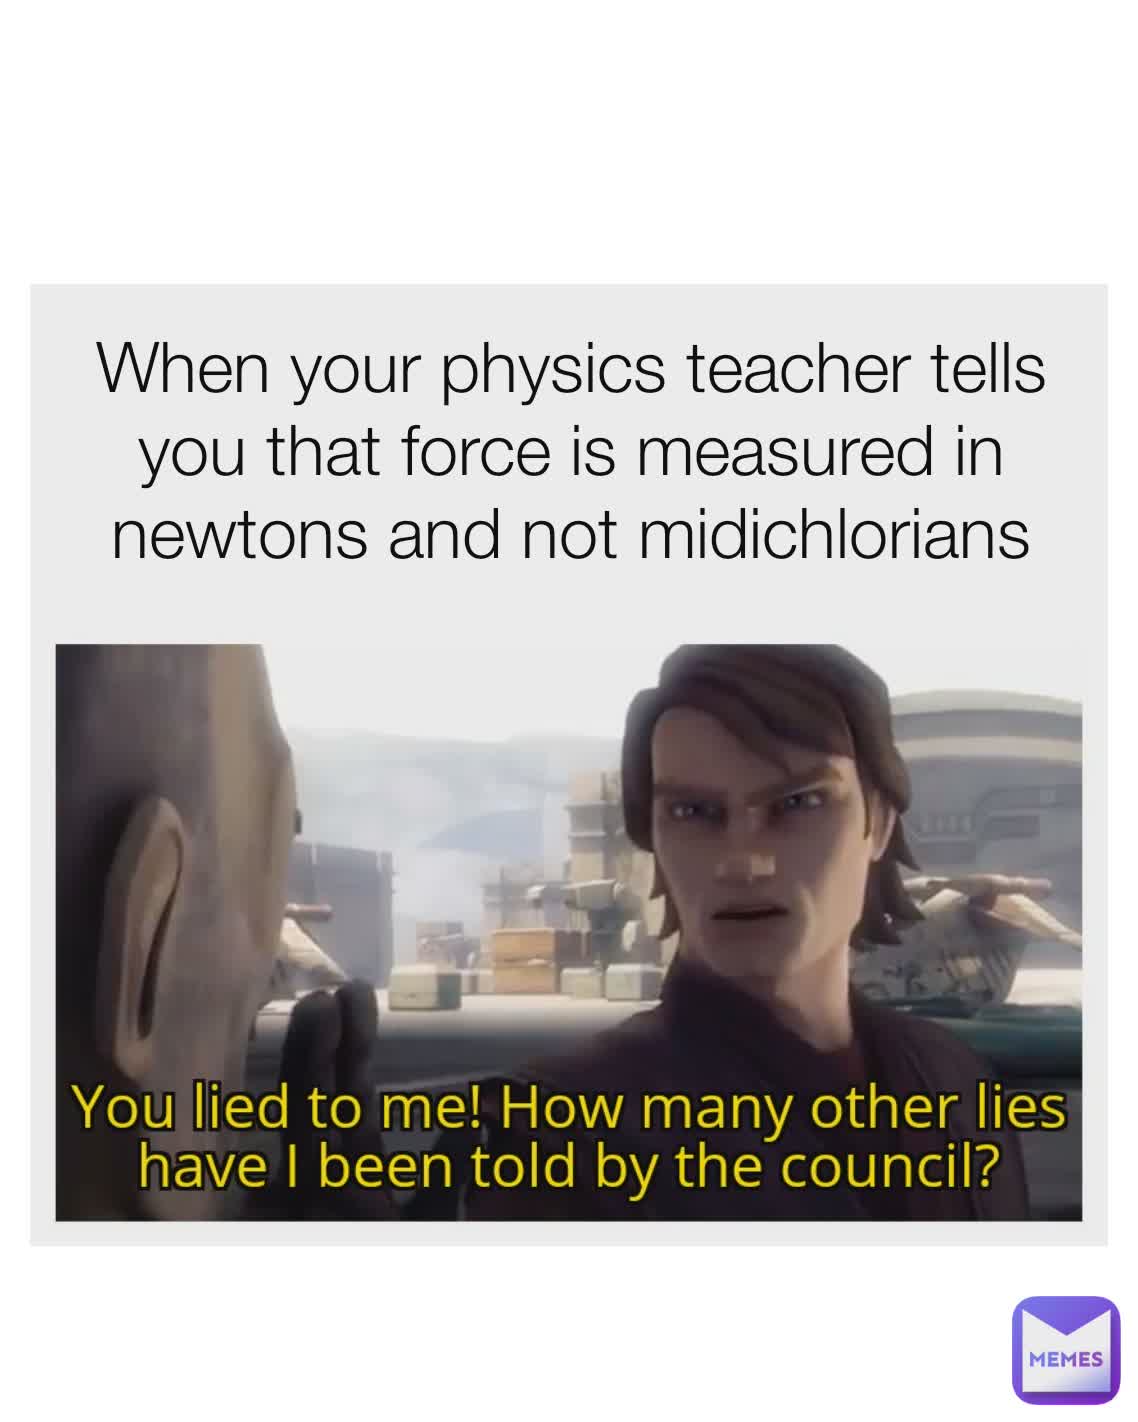 When your physics teacher tells you that force is measured in newtons and not midichlorians